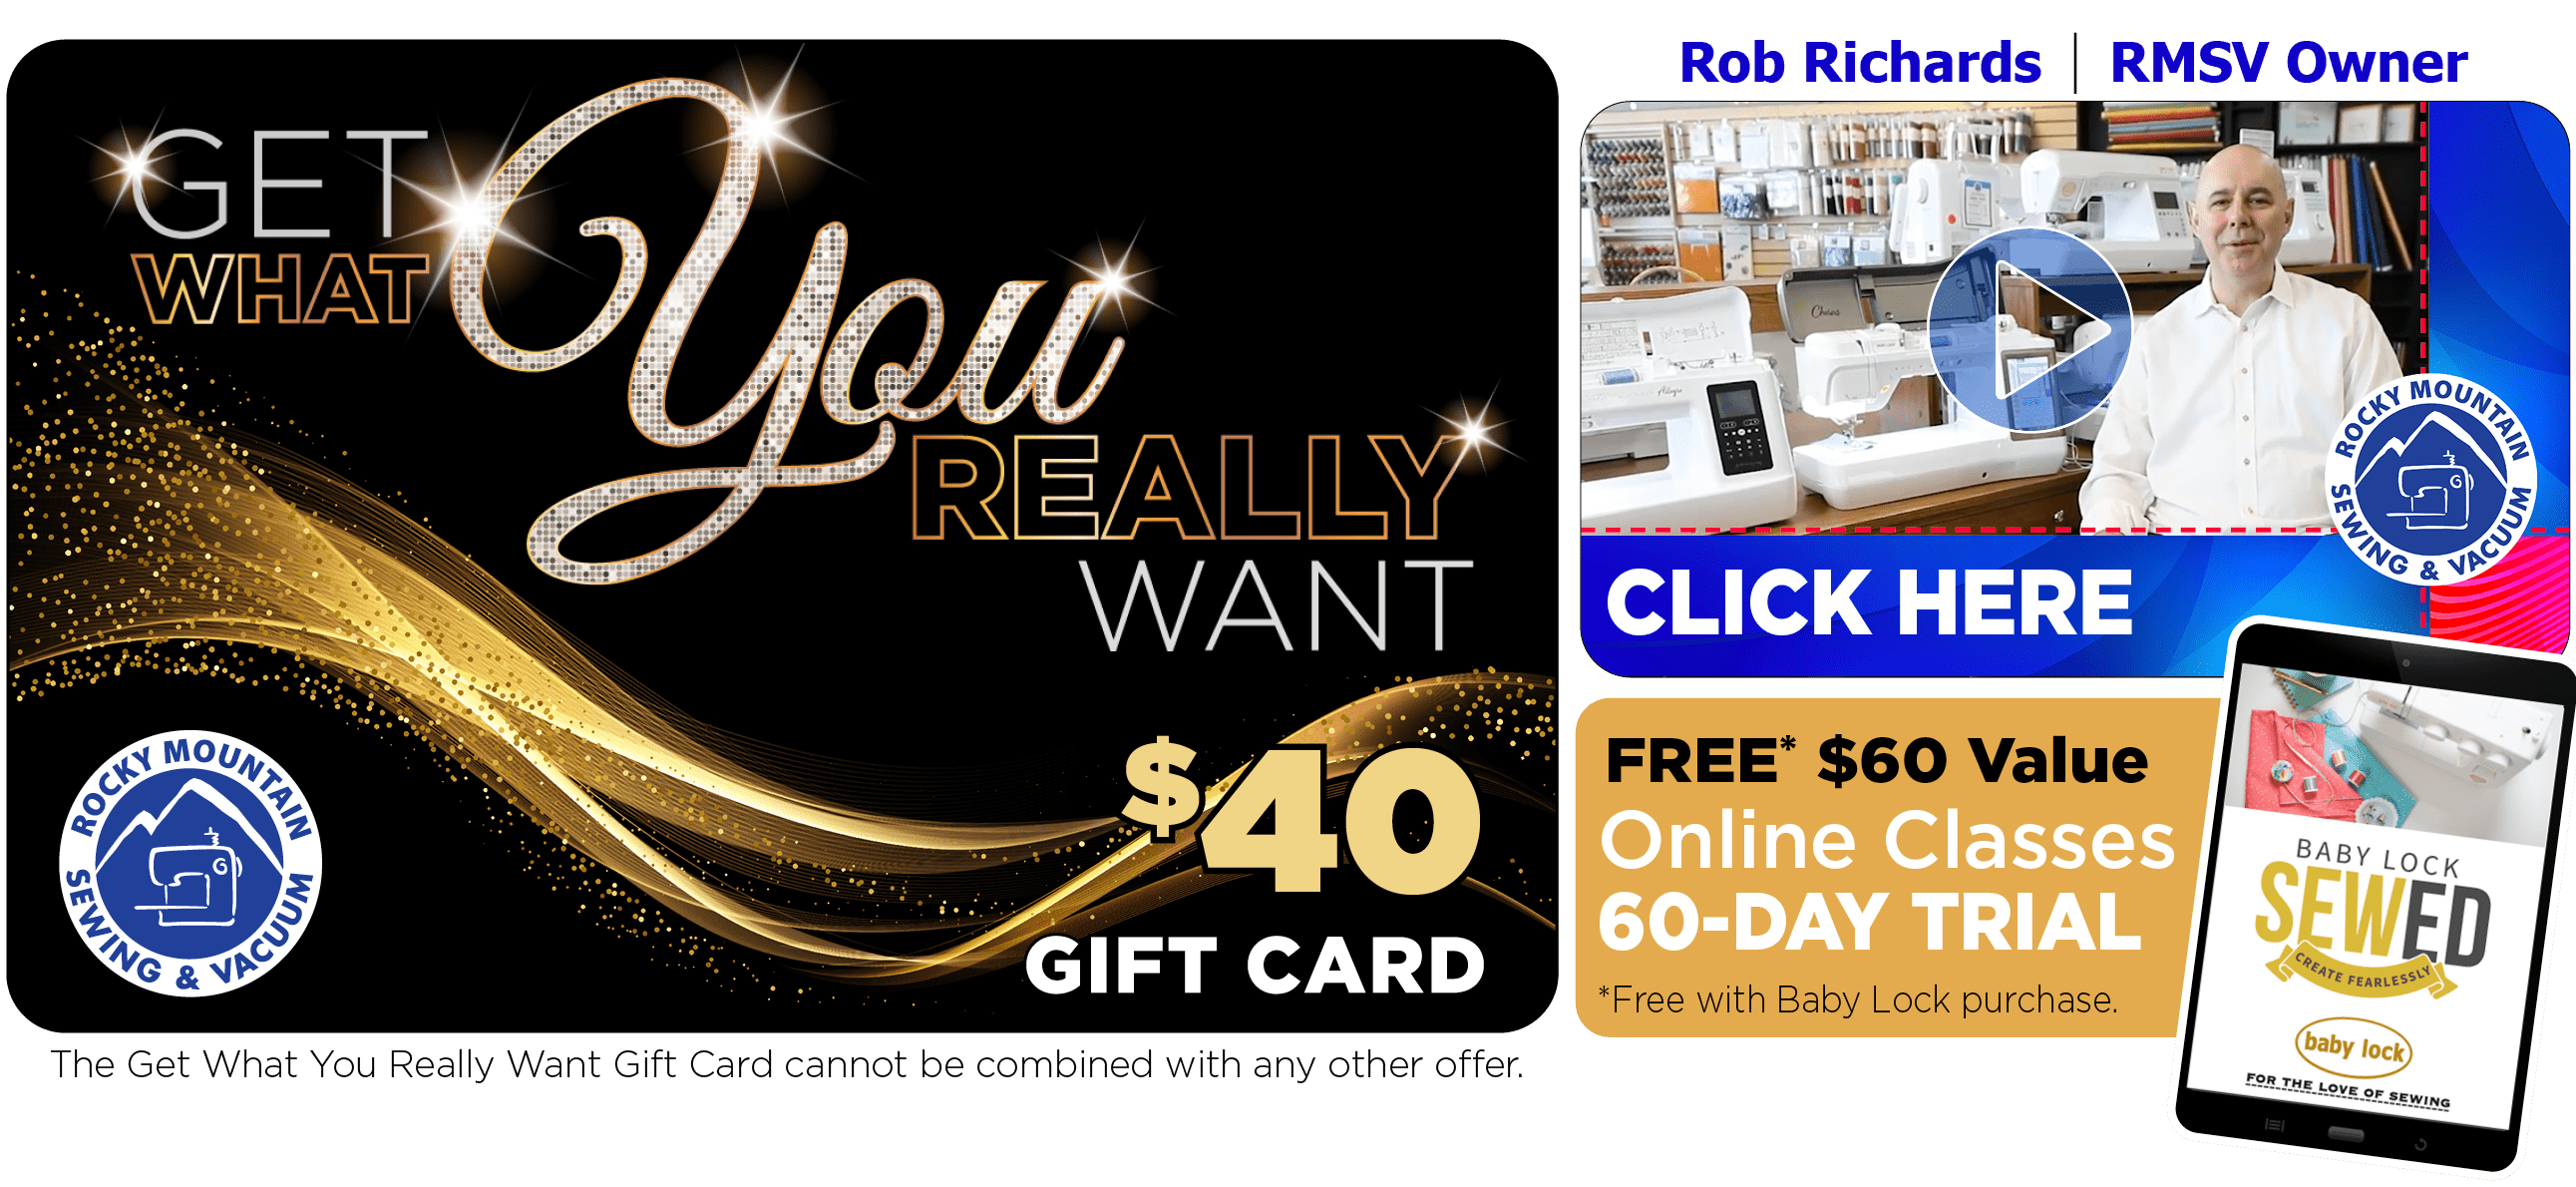 Get What You Really Want $40 Gift Card with Purchase